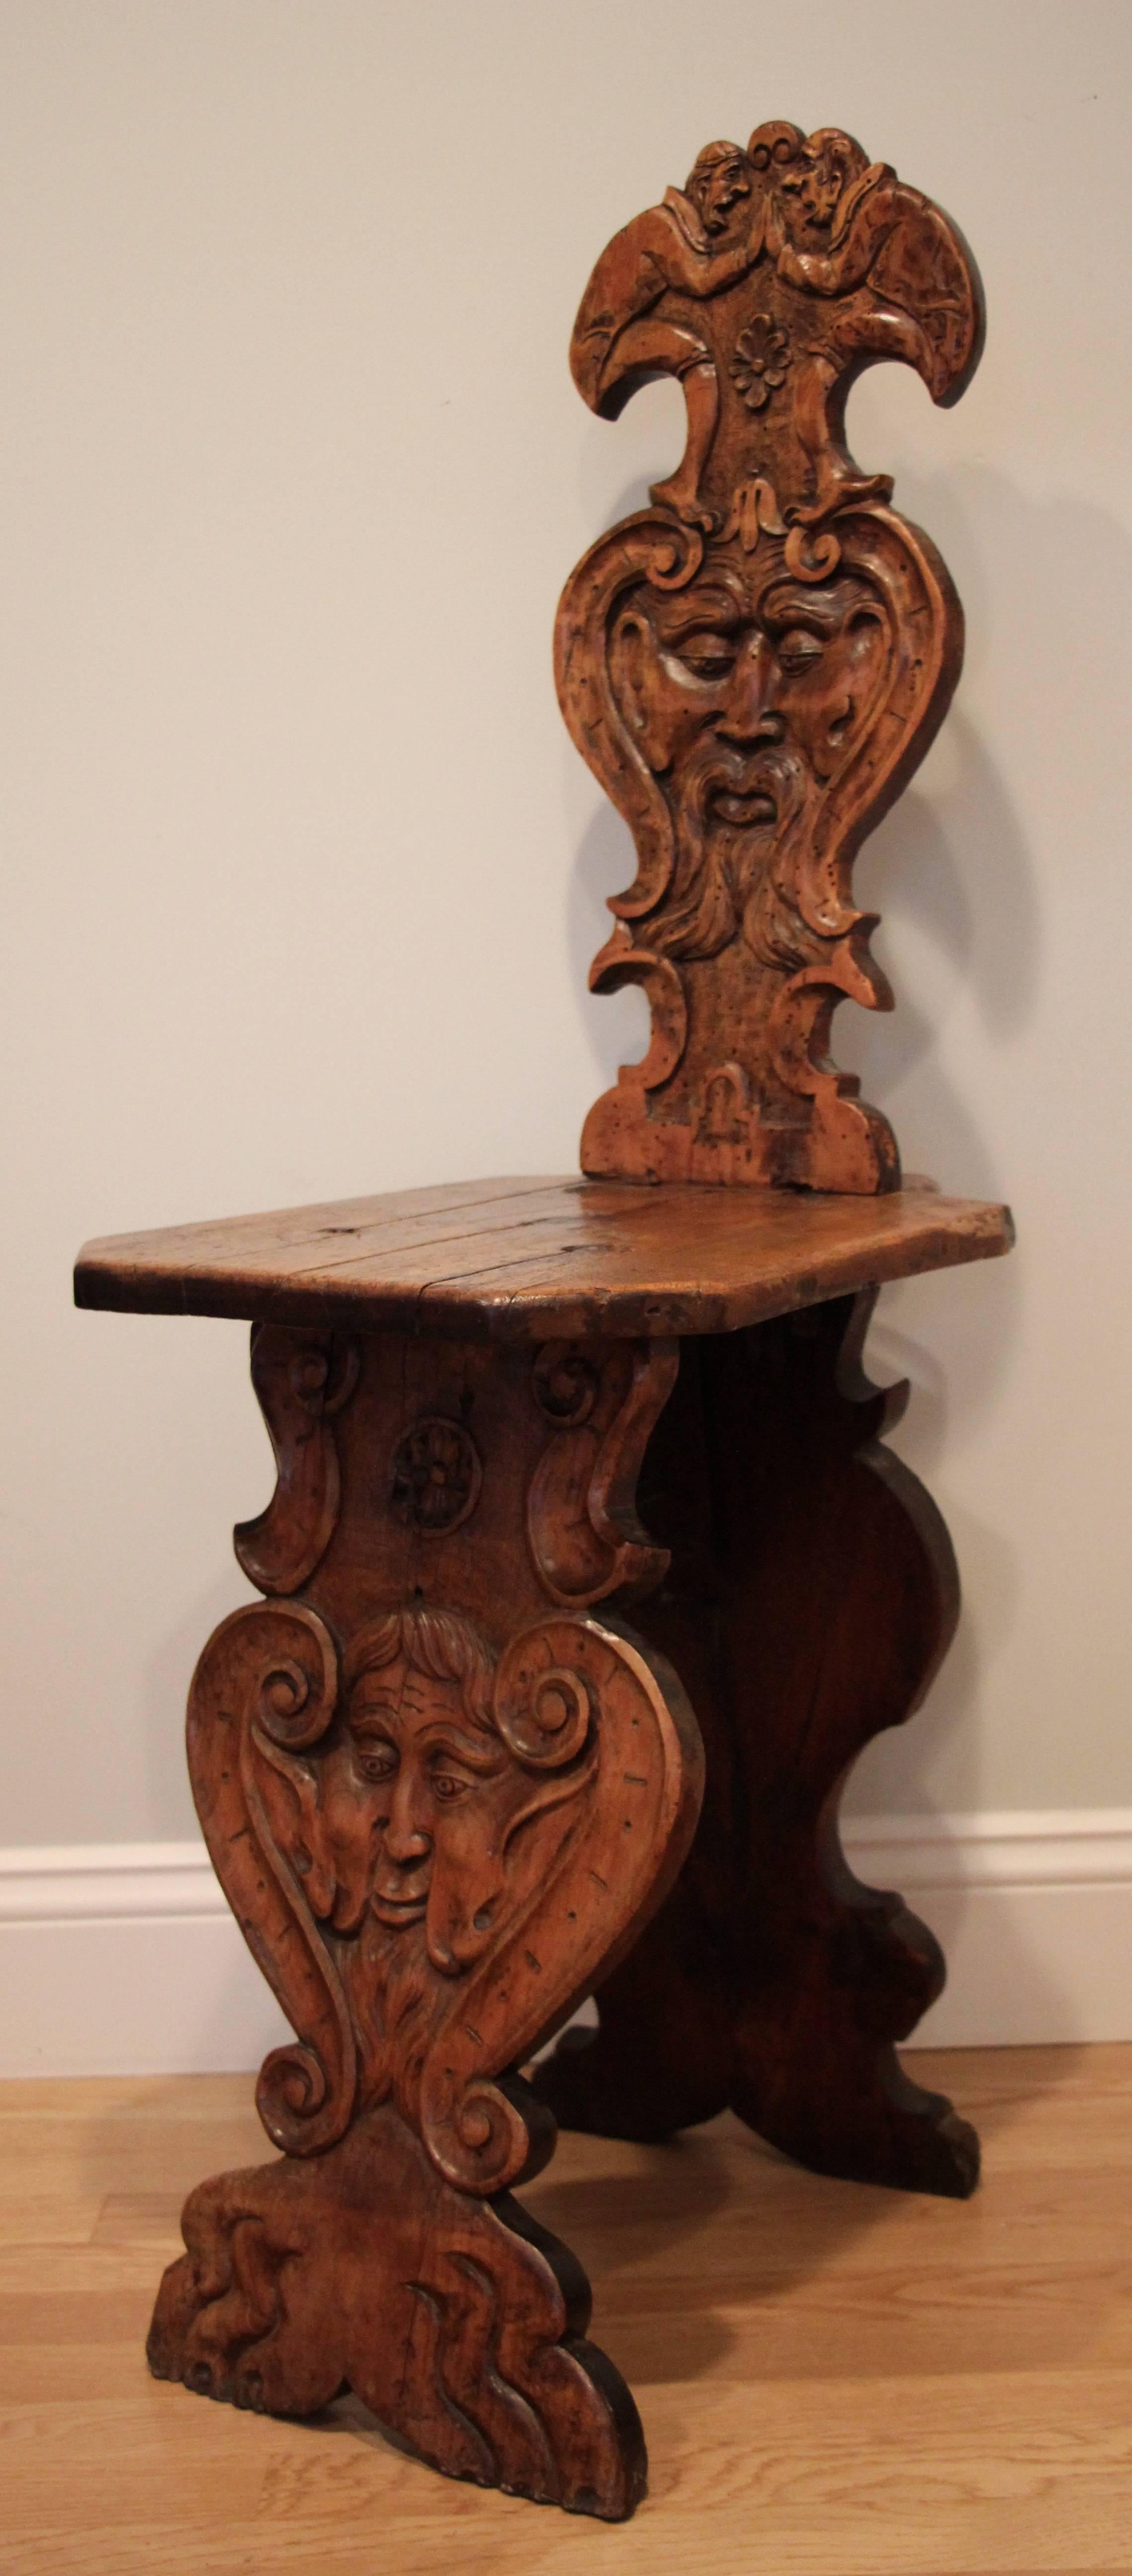 Sgabello chair made of walnut. The back shows a carved grotesque face decoration and two figural decorations, the plank support is decorated with a matching grotesque face mask. The chair was probably reassembled or restored in the 19th century